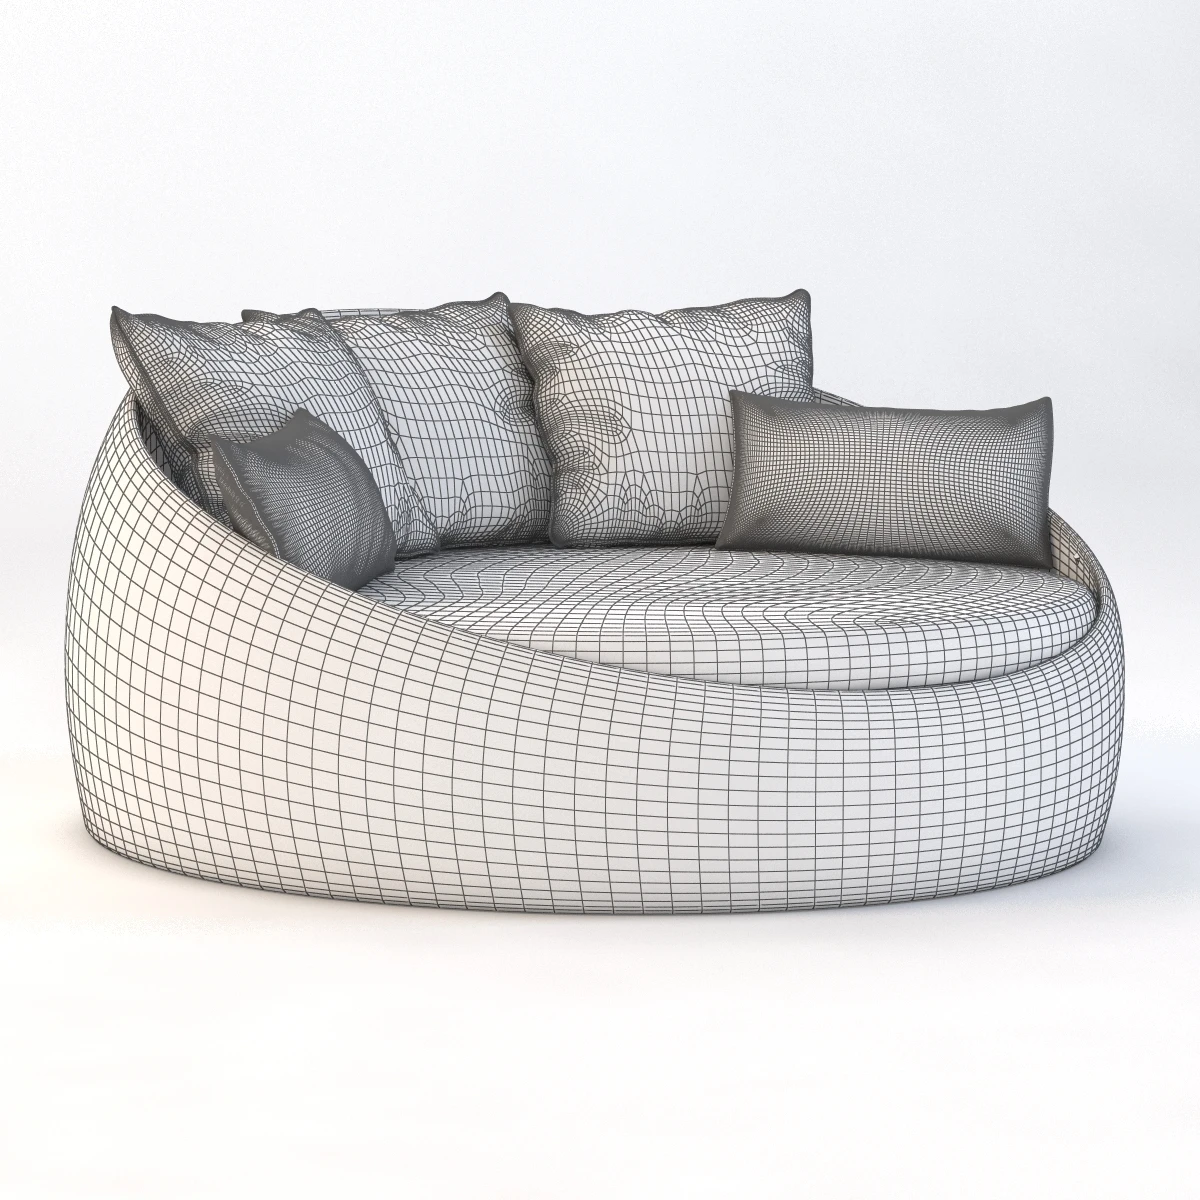 St Martin Wicker Daybed 3D Model_09